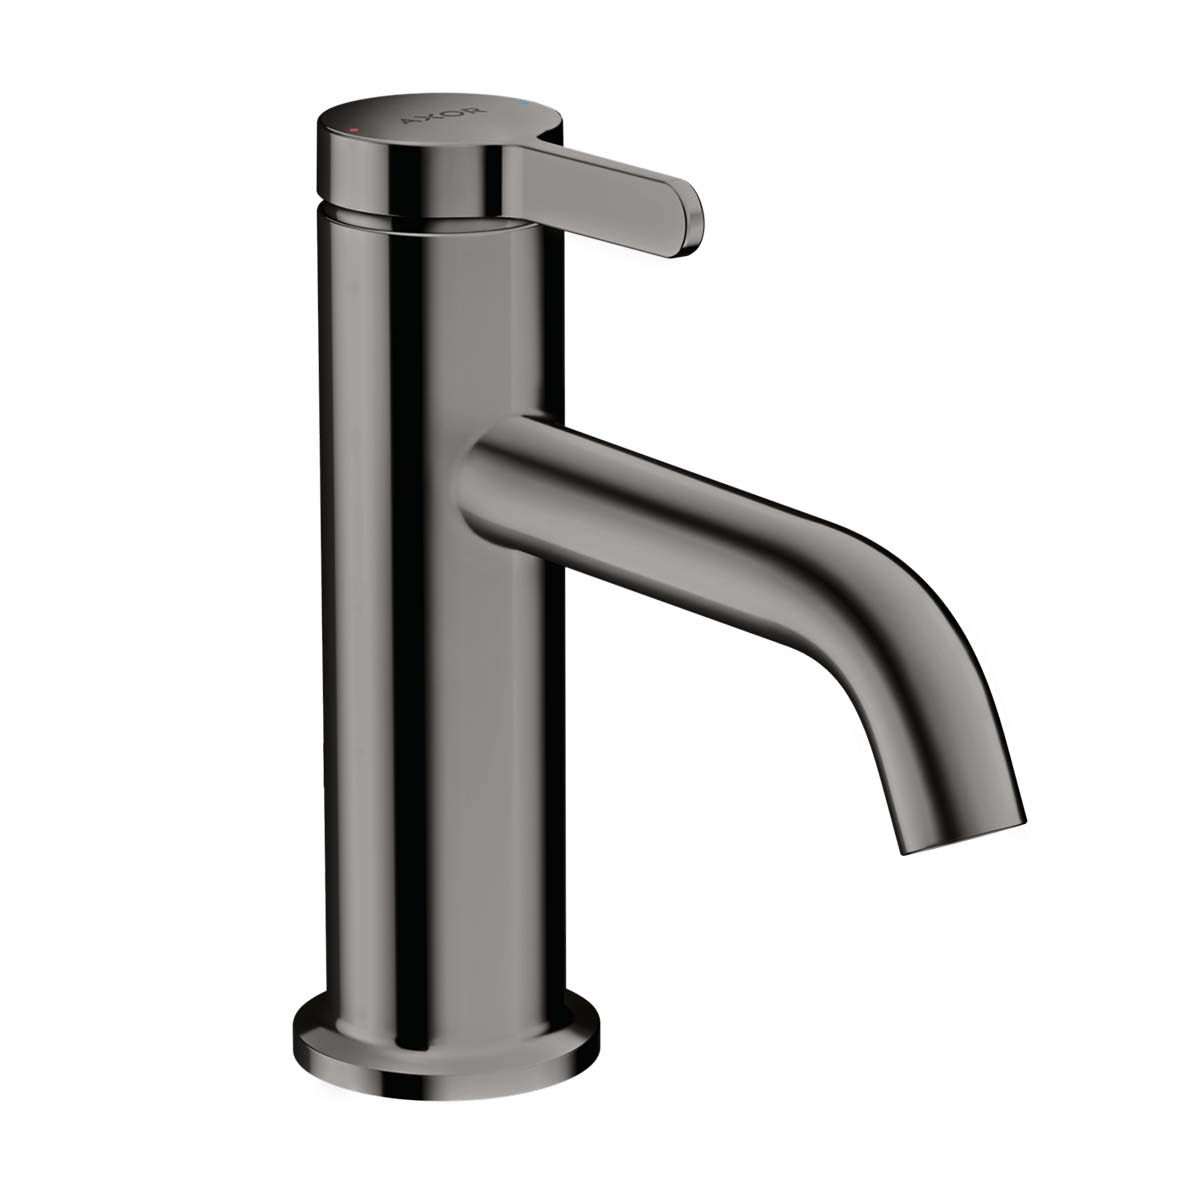 Axor One 70 Single Lever Basin Mixer Tap with Waste Polished Black Chrome